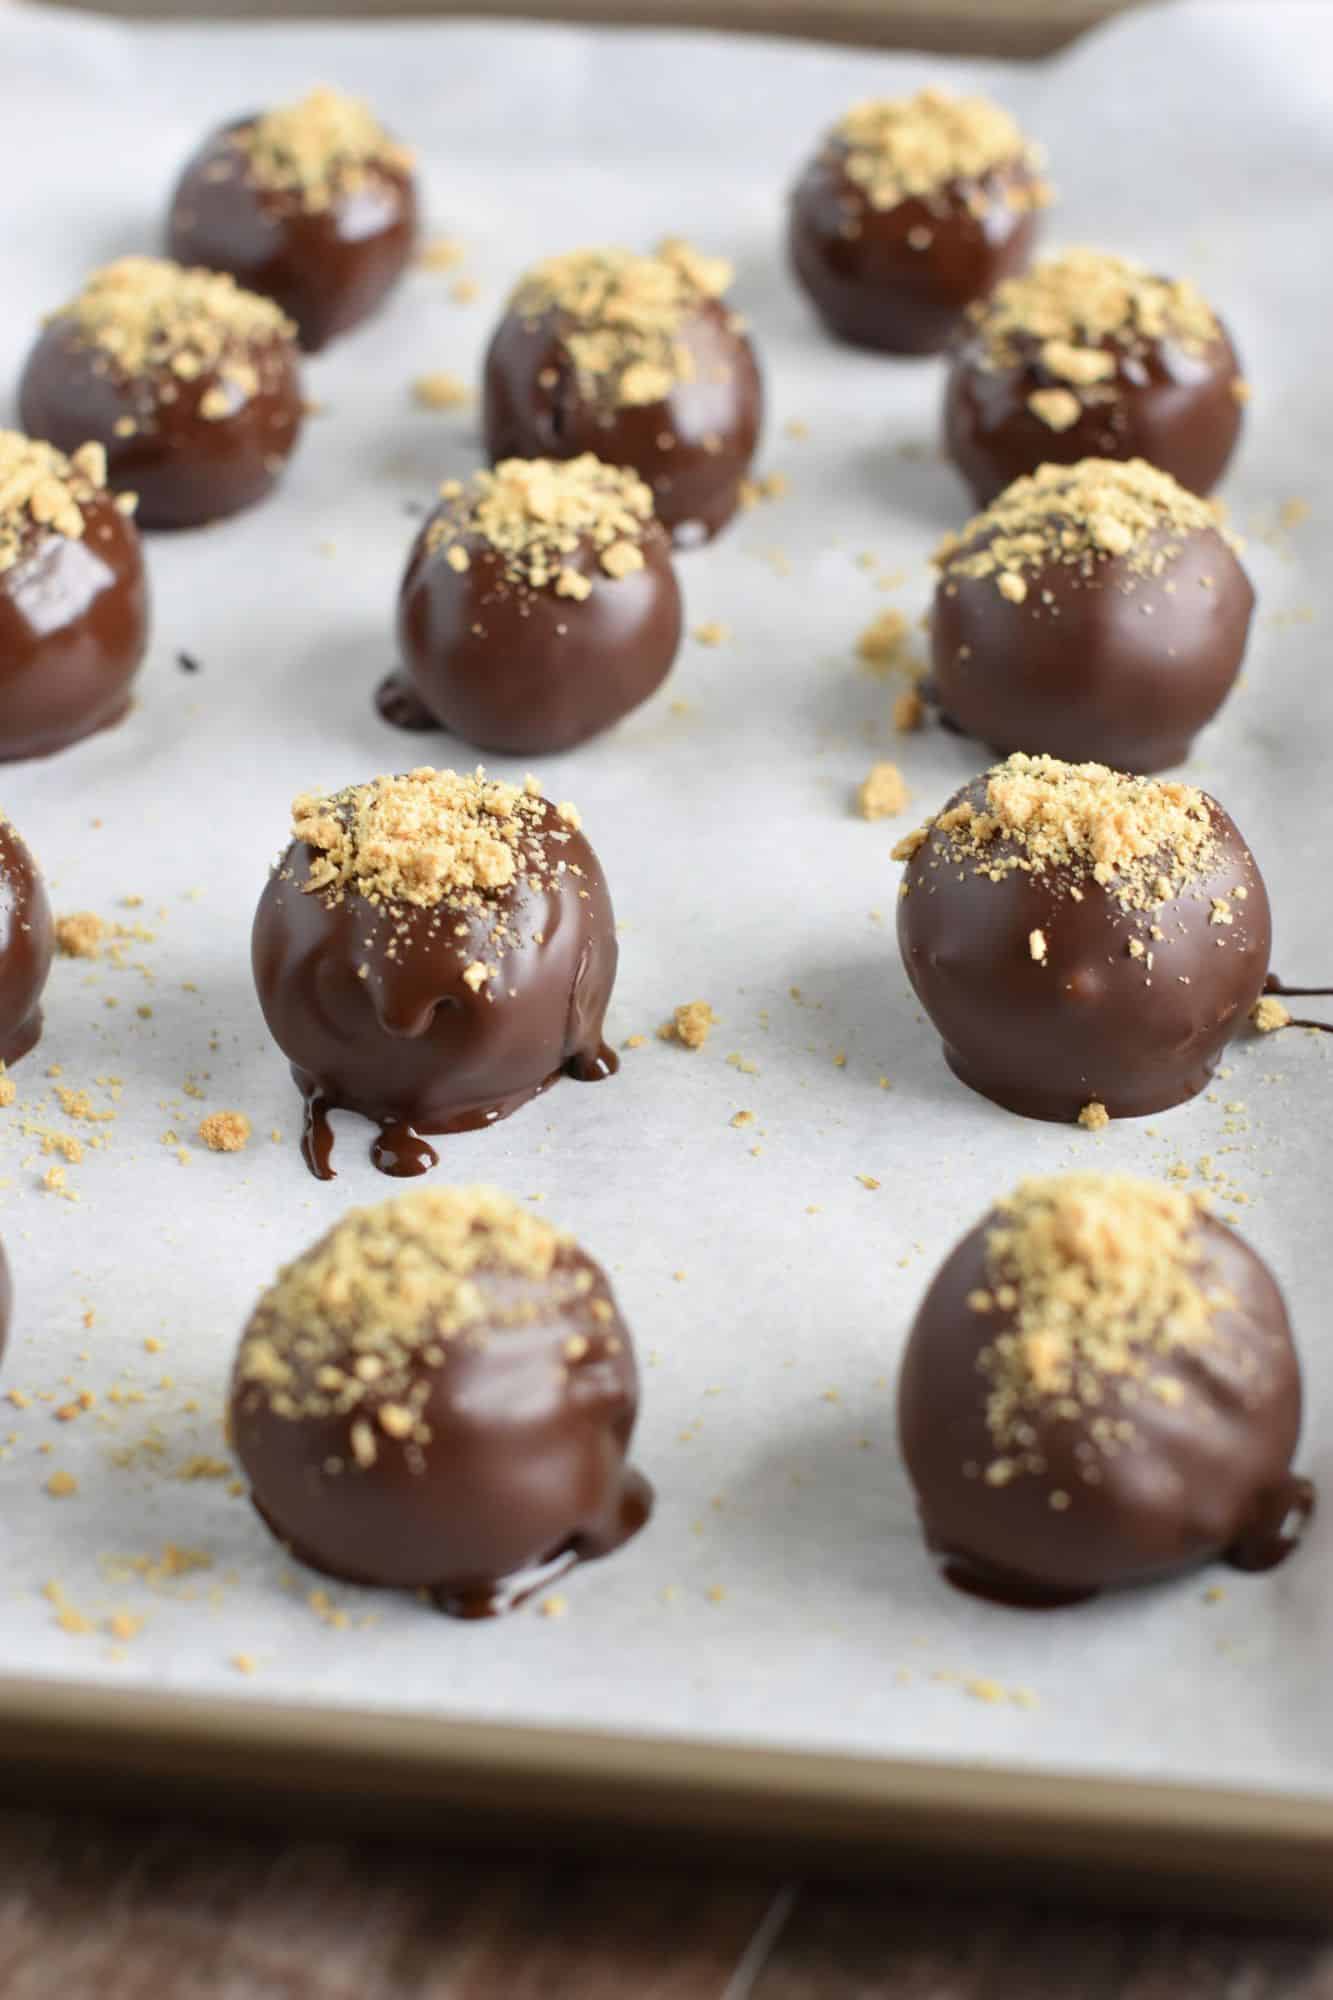 truffles coated with chocolate and topped with crumbled grahams on baking sheet